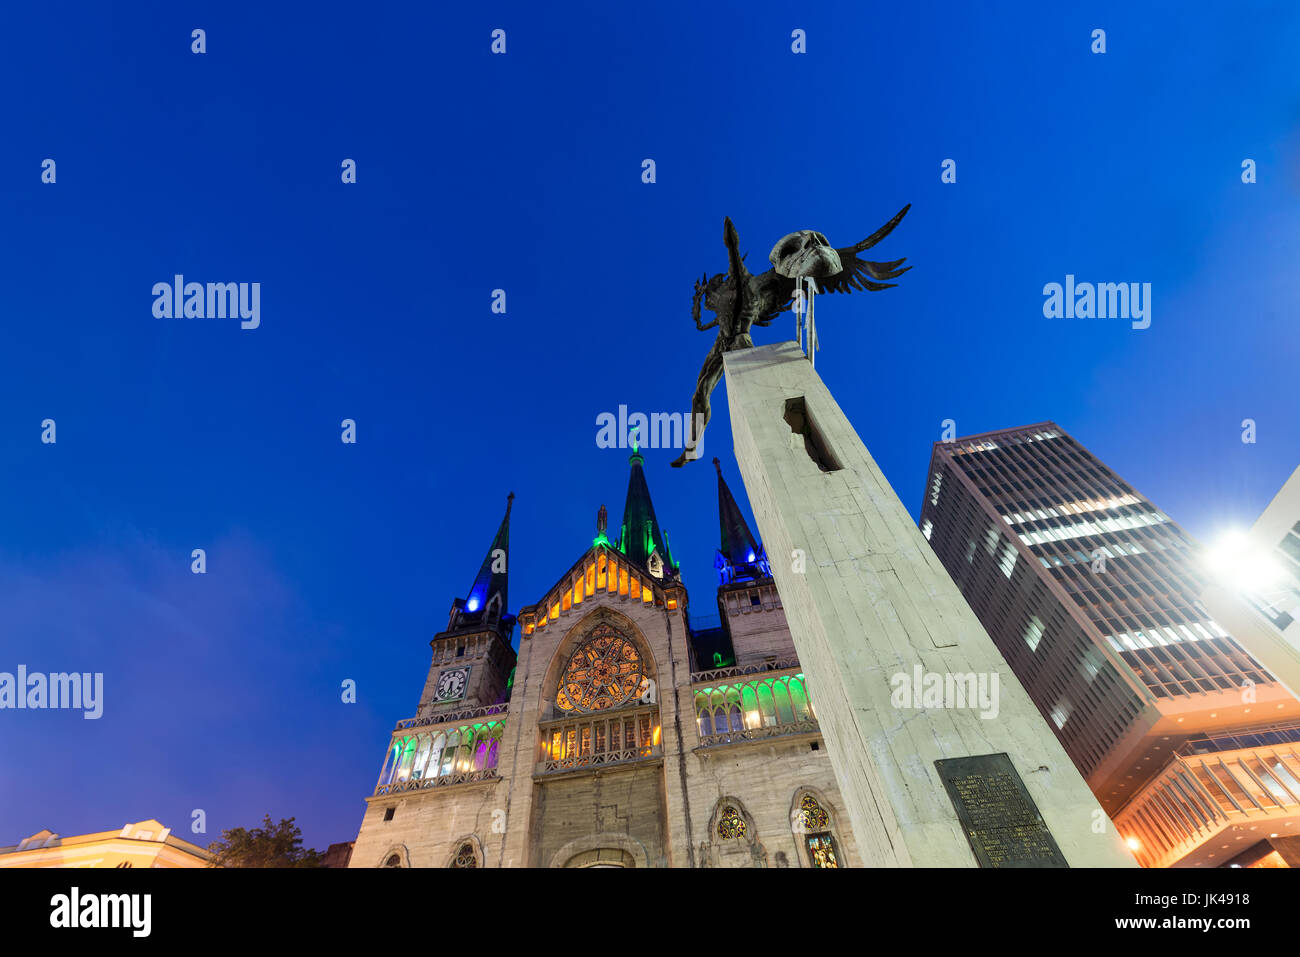 Looking up at the Bolivar Condor statue and cathedral in the Plaza de Bolivar in Manizales, Colombia Stock Photo